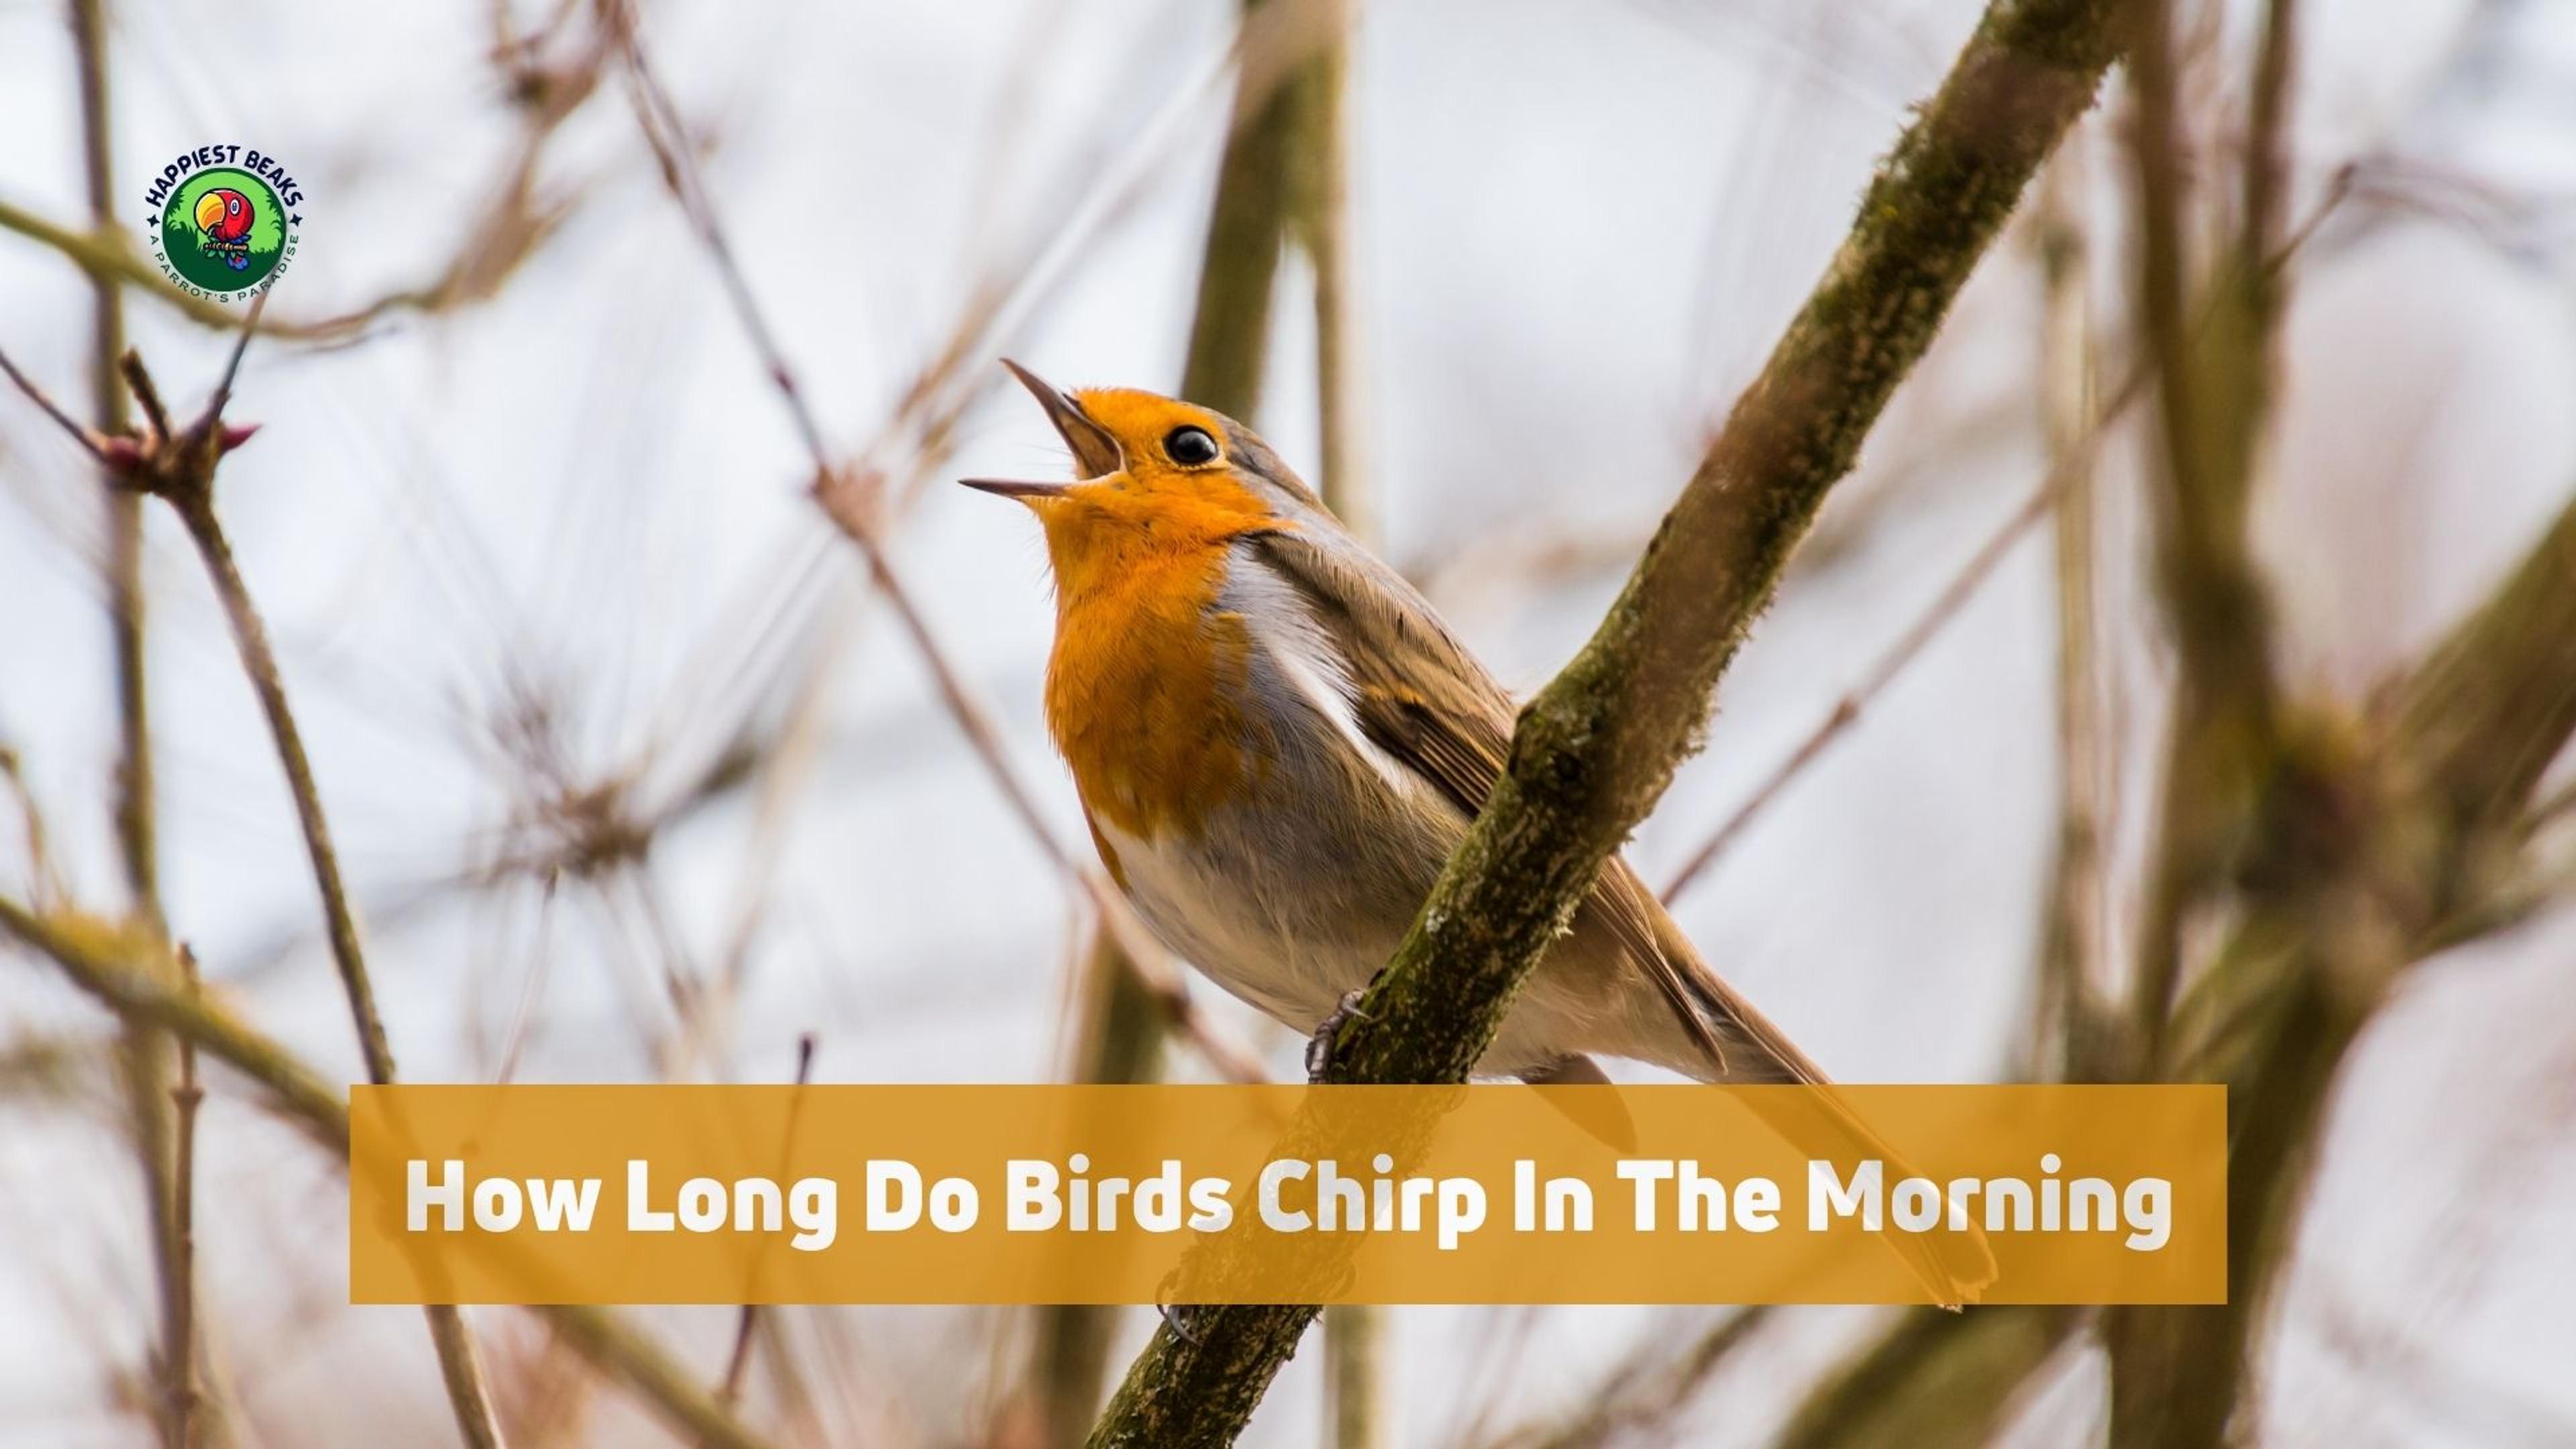 How Long Do Birds Chirp in the Morning